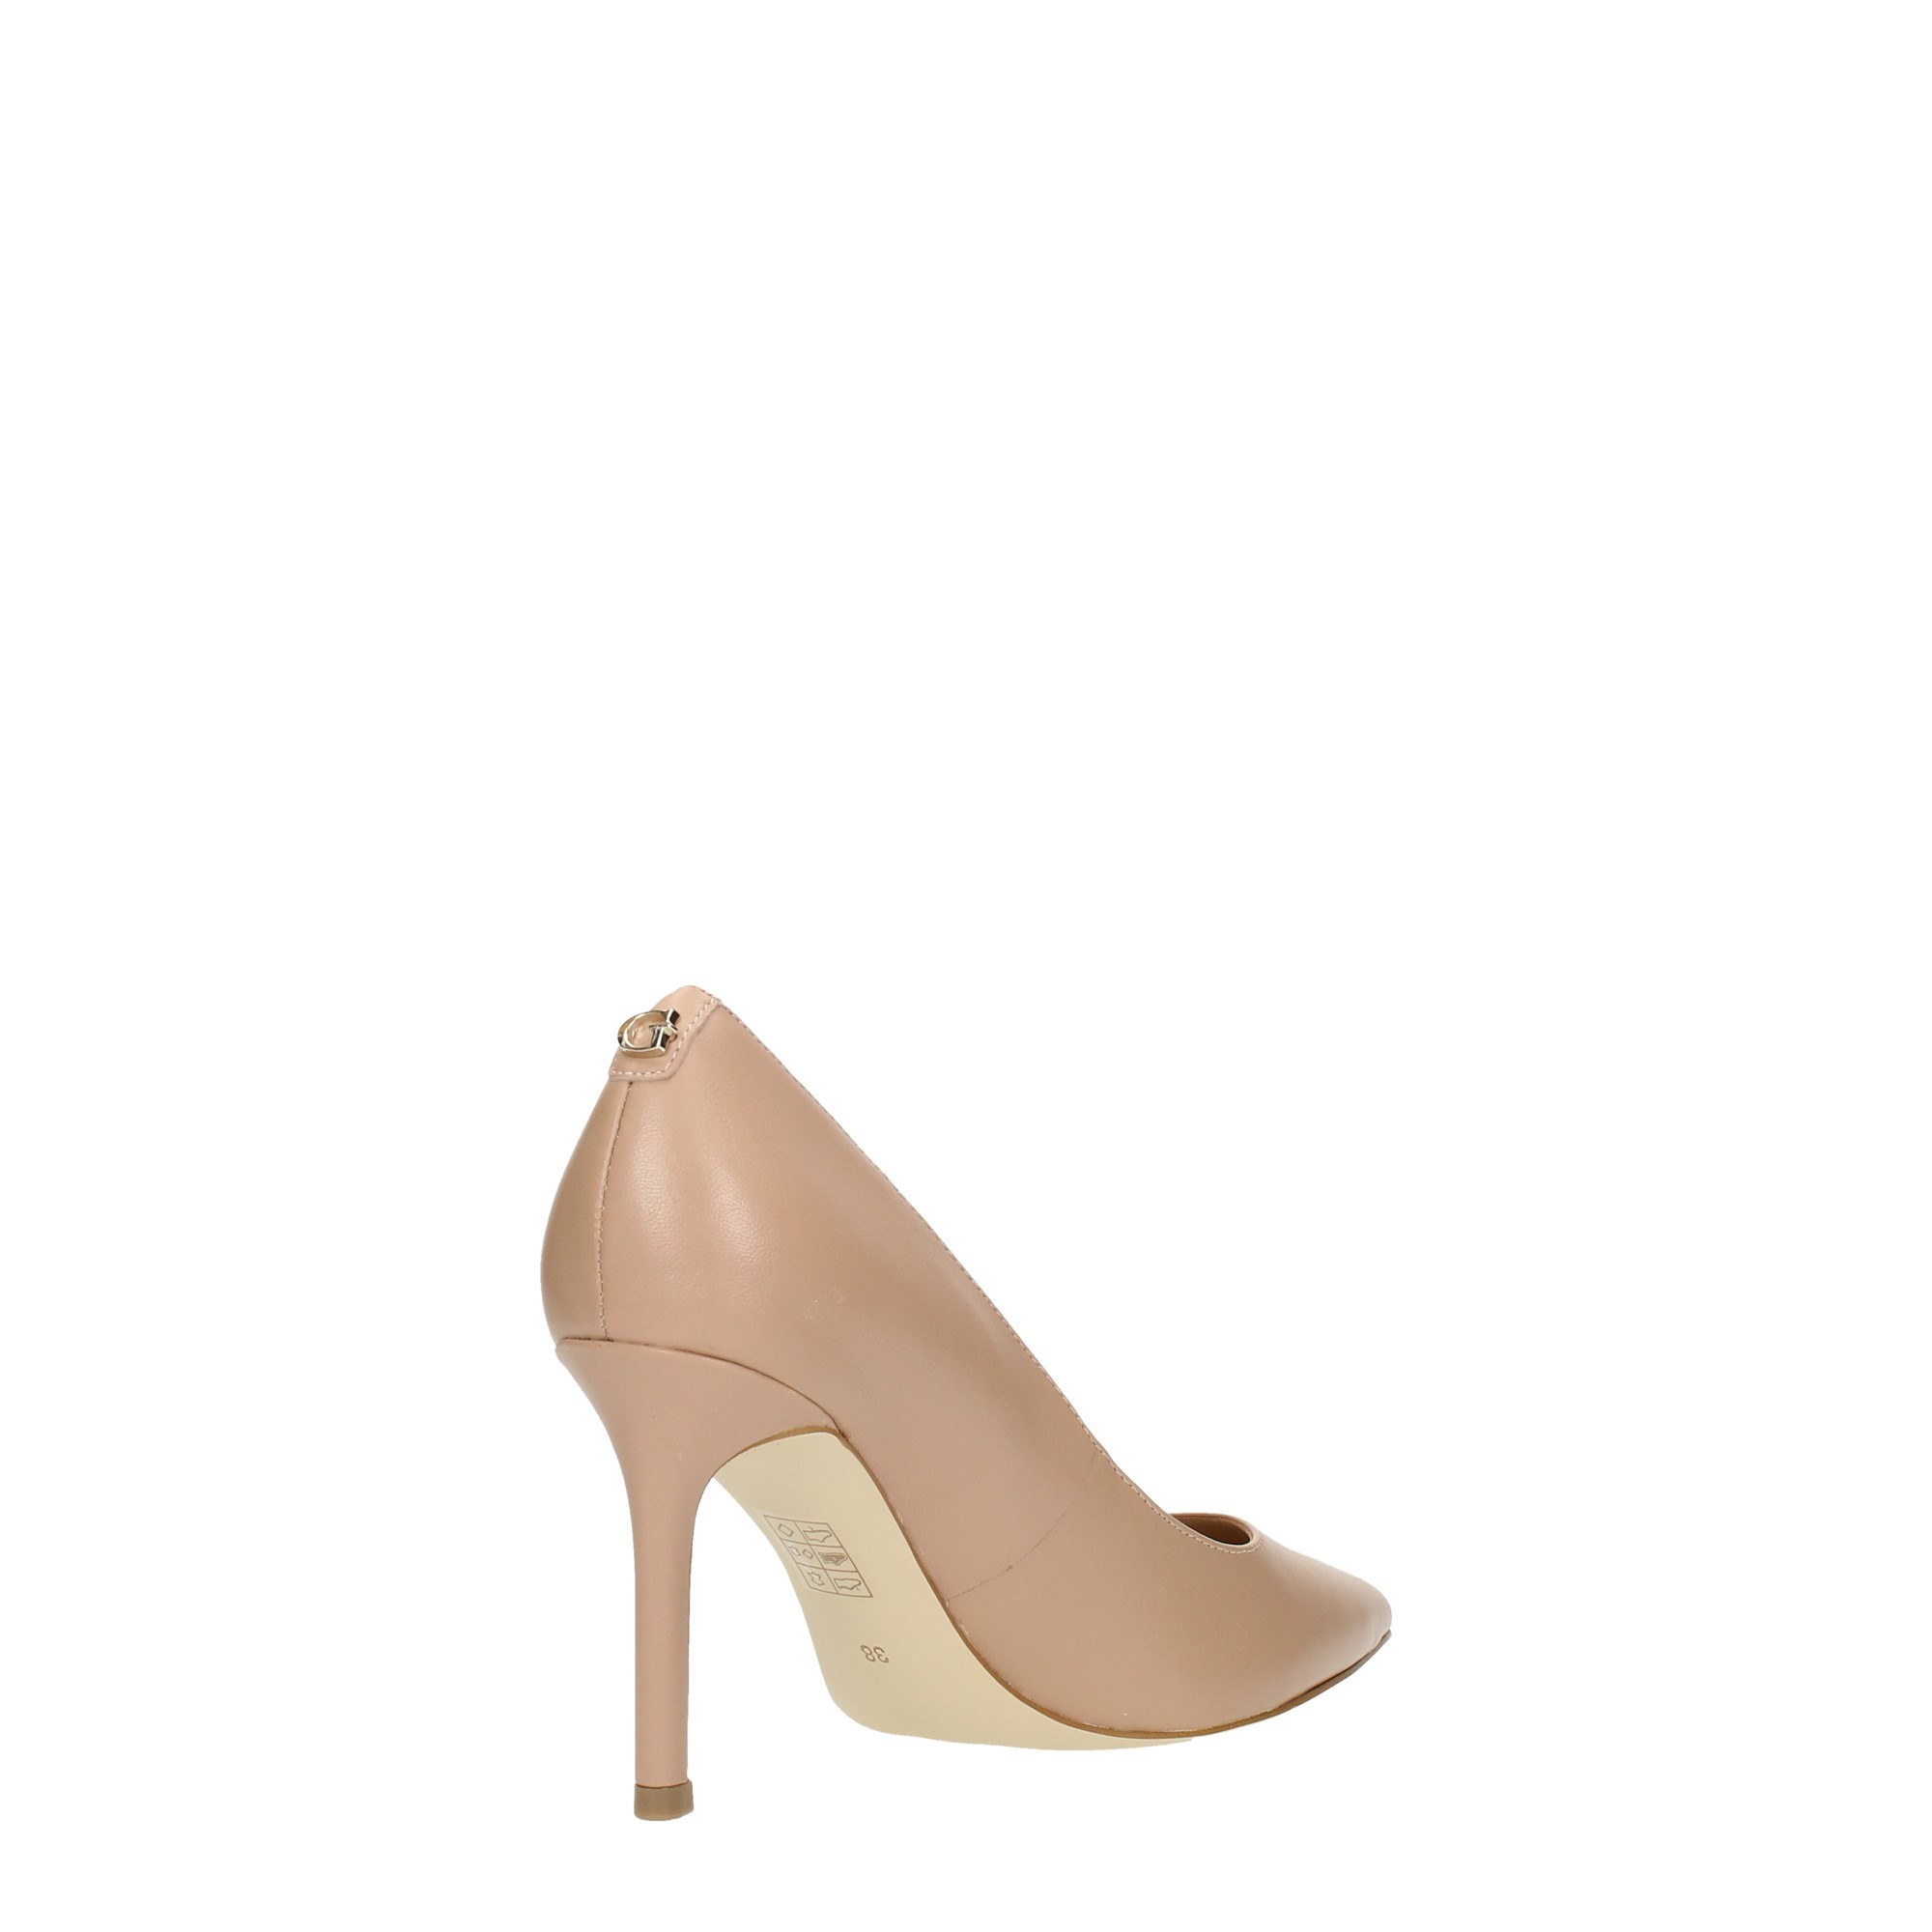 Guess Shoes Women Cleavage And Heeled Shoes Beige FL7DAE